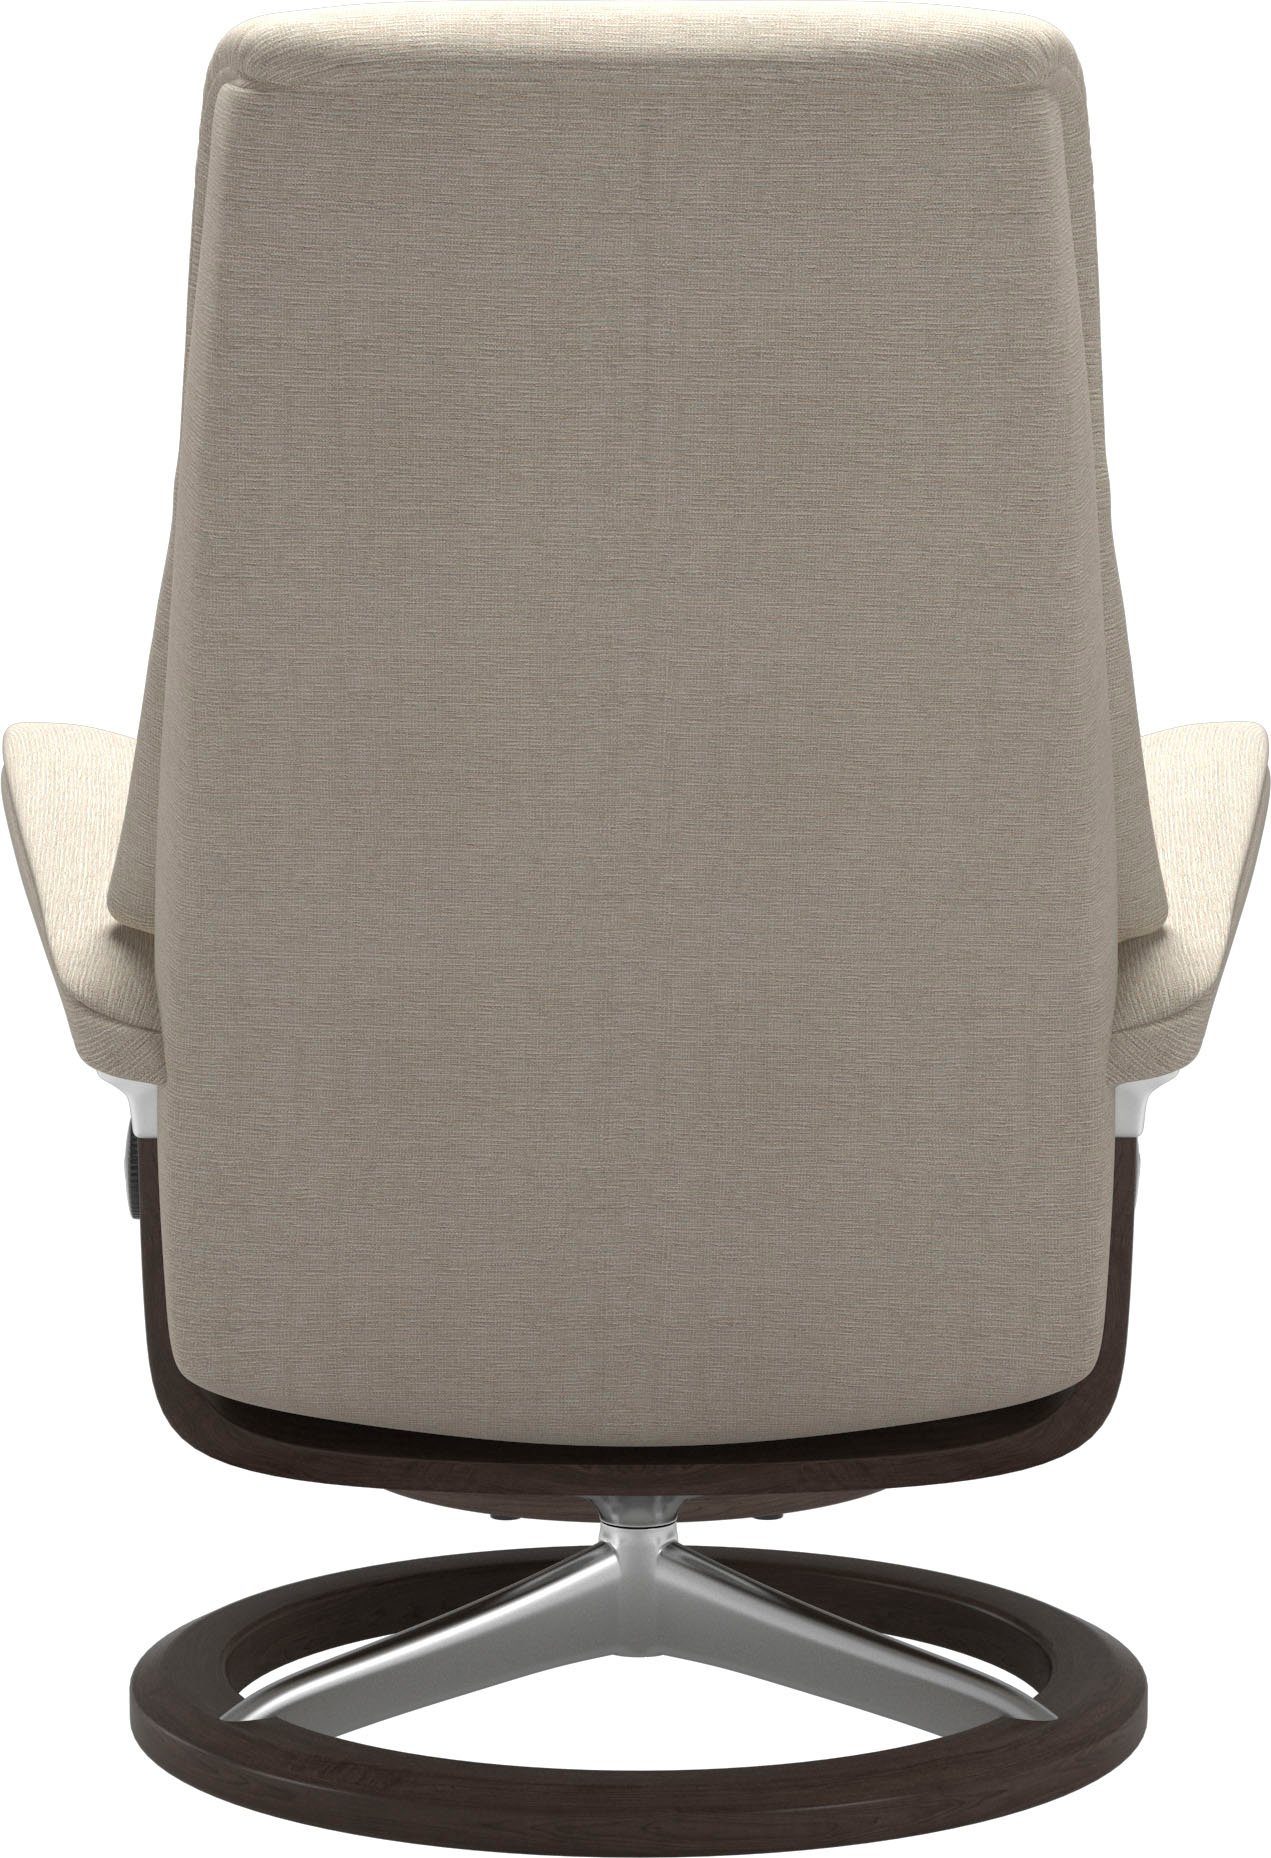 Signature Größe Base, Stressless® View, mit Wenge Relaxsessel S,Gestell